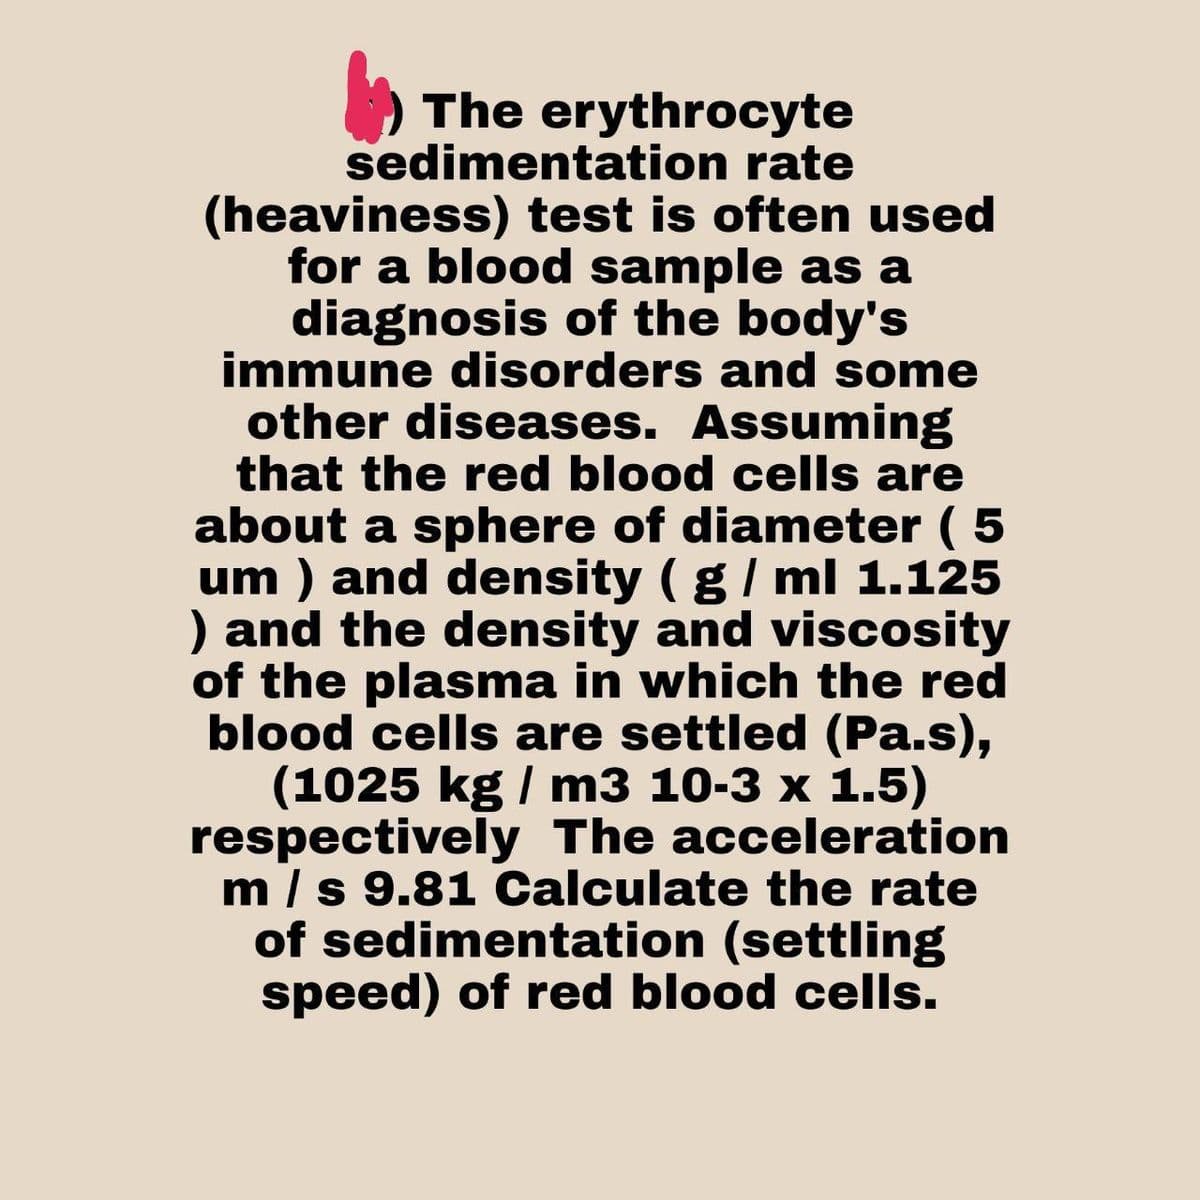 The erythrocyte
sedimentation rate
(heaviness) test is often used
for a blood sample as a
diagnosis of the body's
immune disorders and some
other diseases. Assuming
that the red blood cells are
about a sphere of diameter ( 5
um ) and density ( g / ml 1.125
) and the density and viscosity
of the plasma in which the red
blood cells are settled (Pa.s),
(1025 kg / m3 10-3 x 1.5)
respectively The acceleration
m / s 9.81 Calculate the rate
of sedimentation (settling
speed) of red blood cells.
